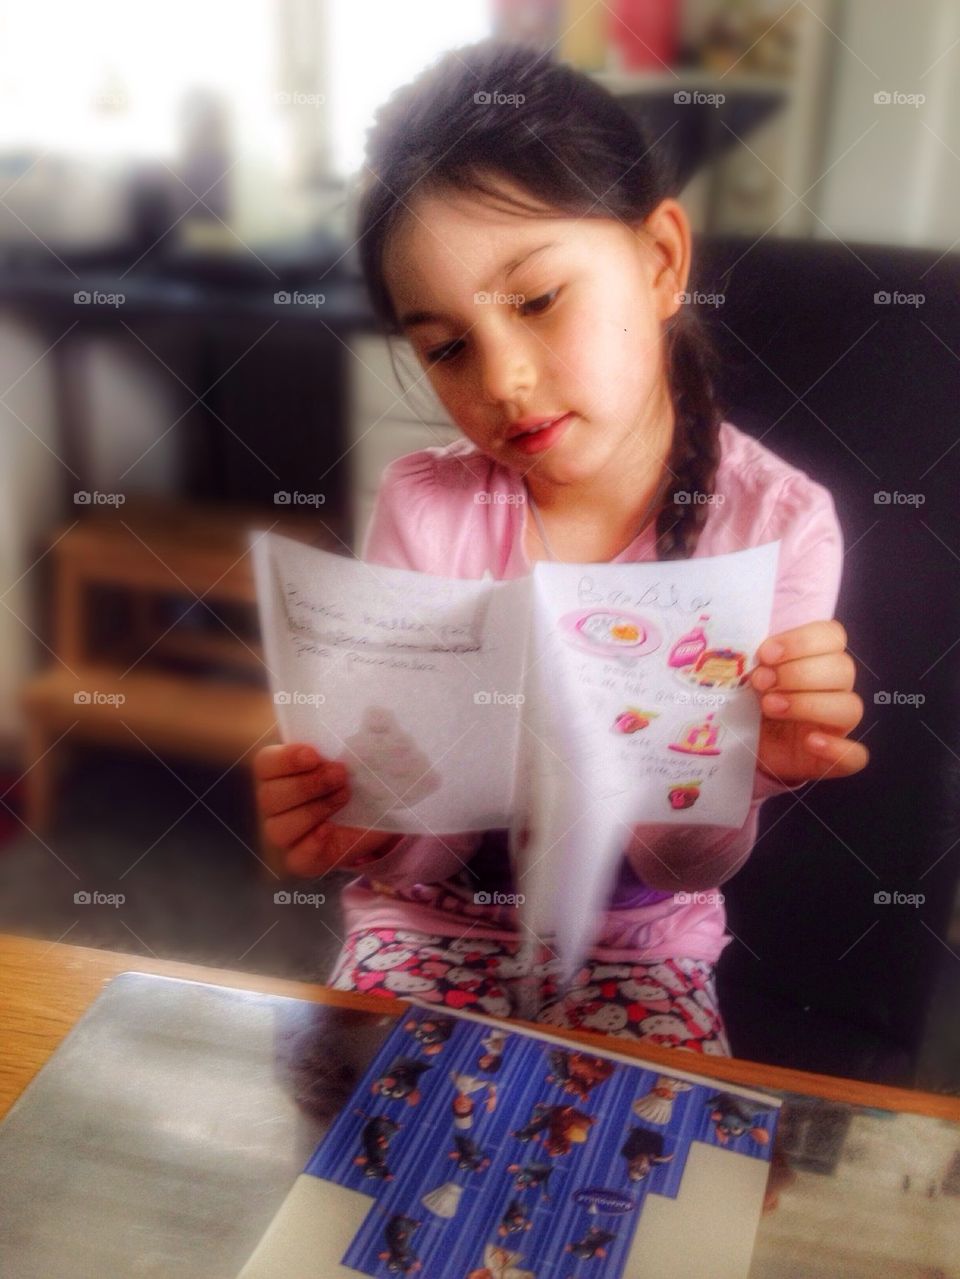 Making a book by herself